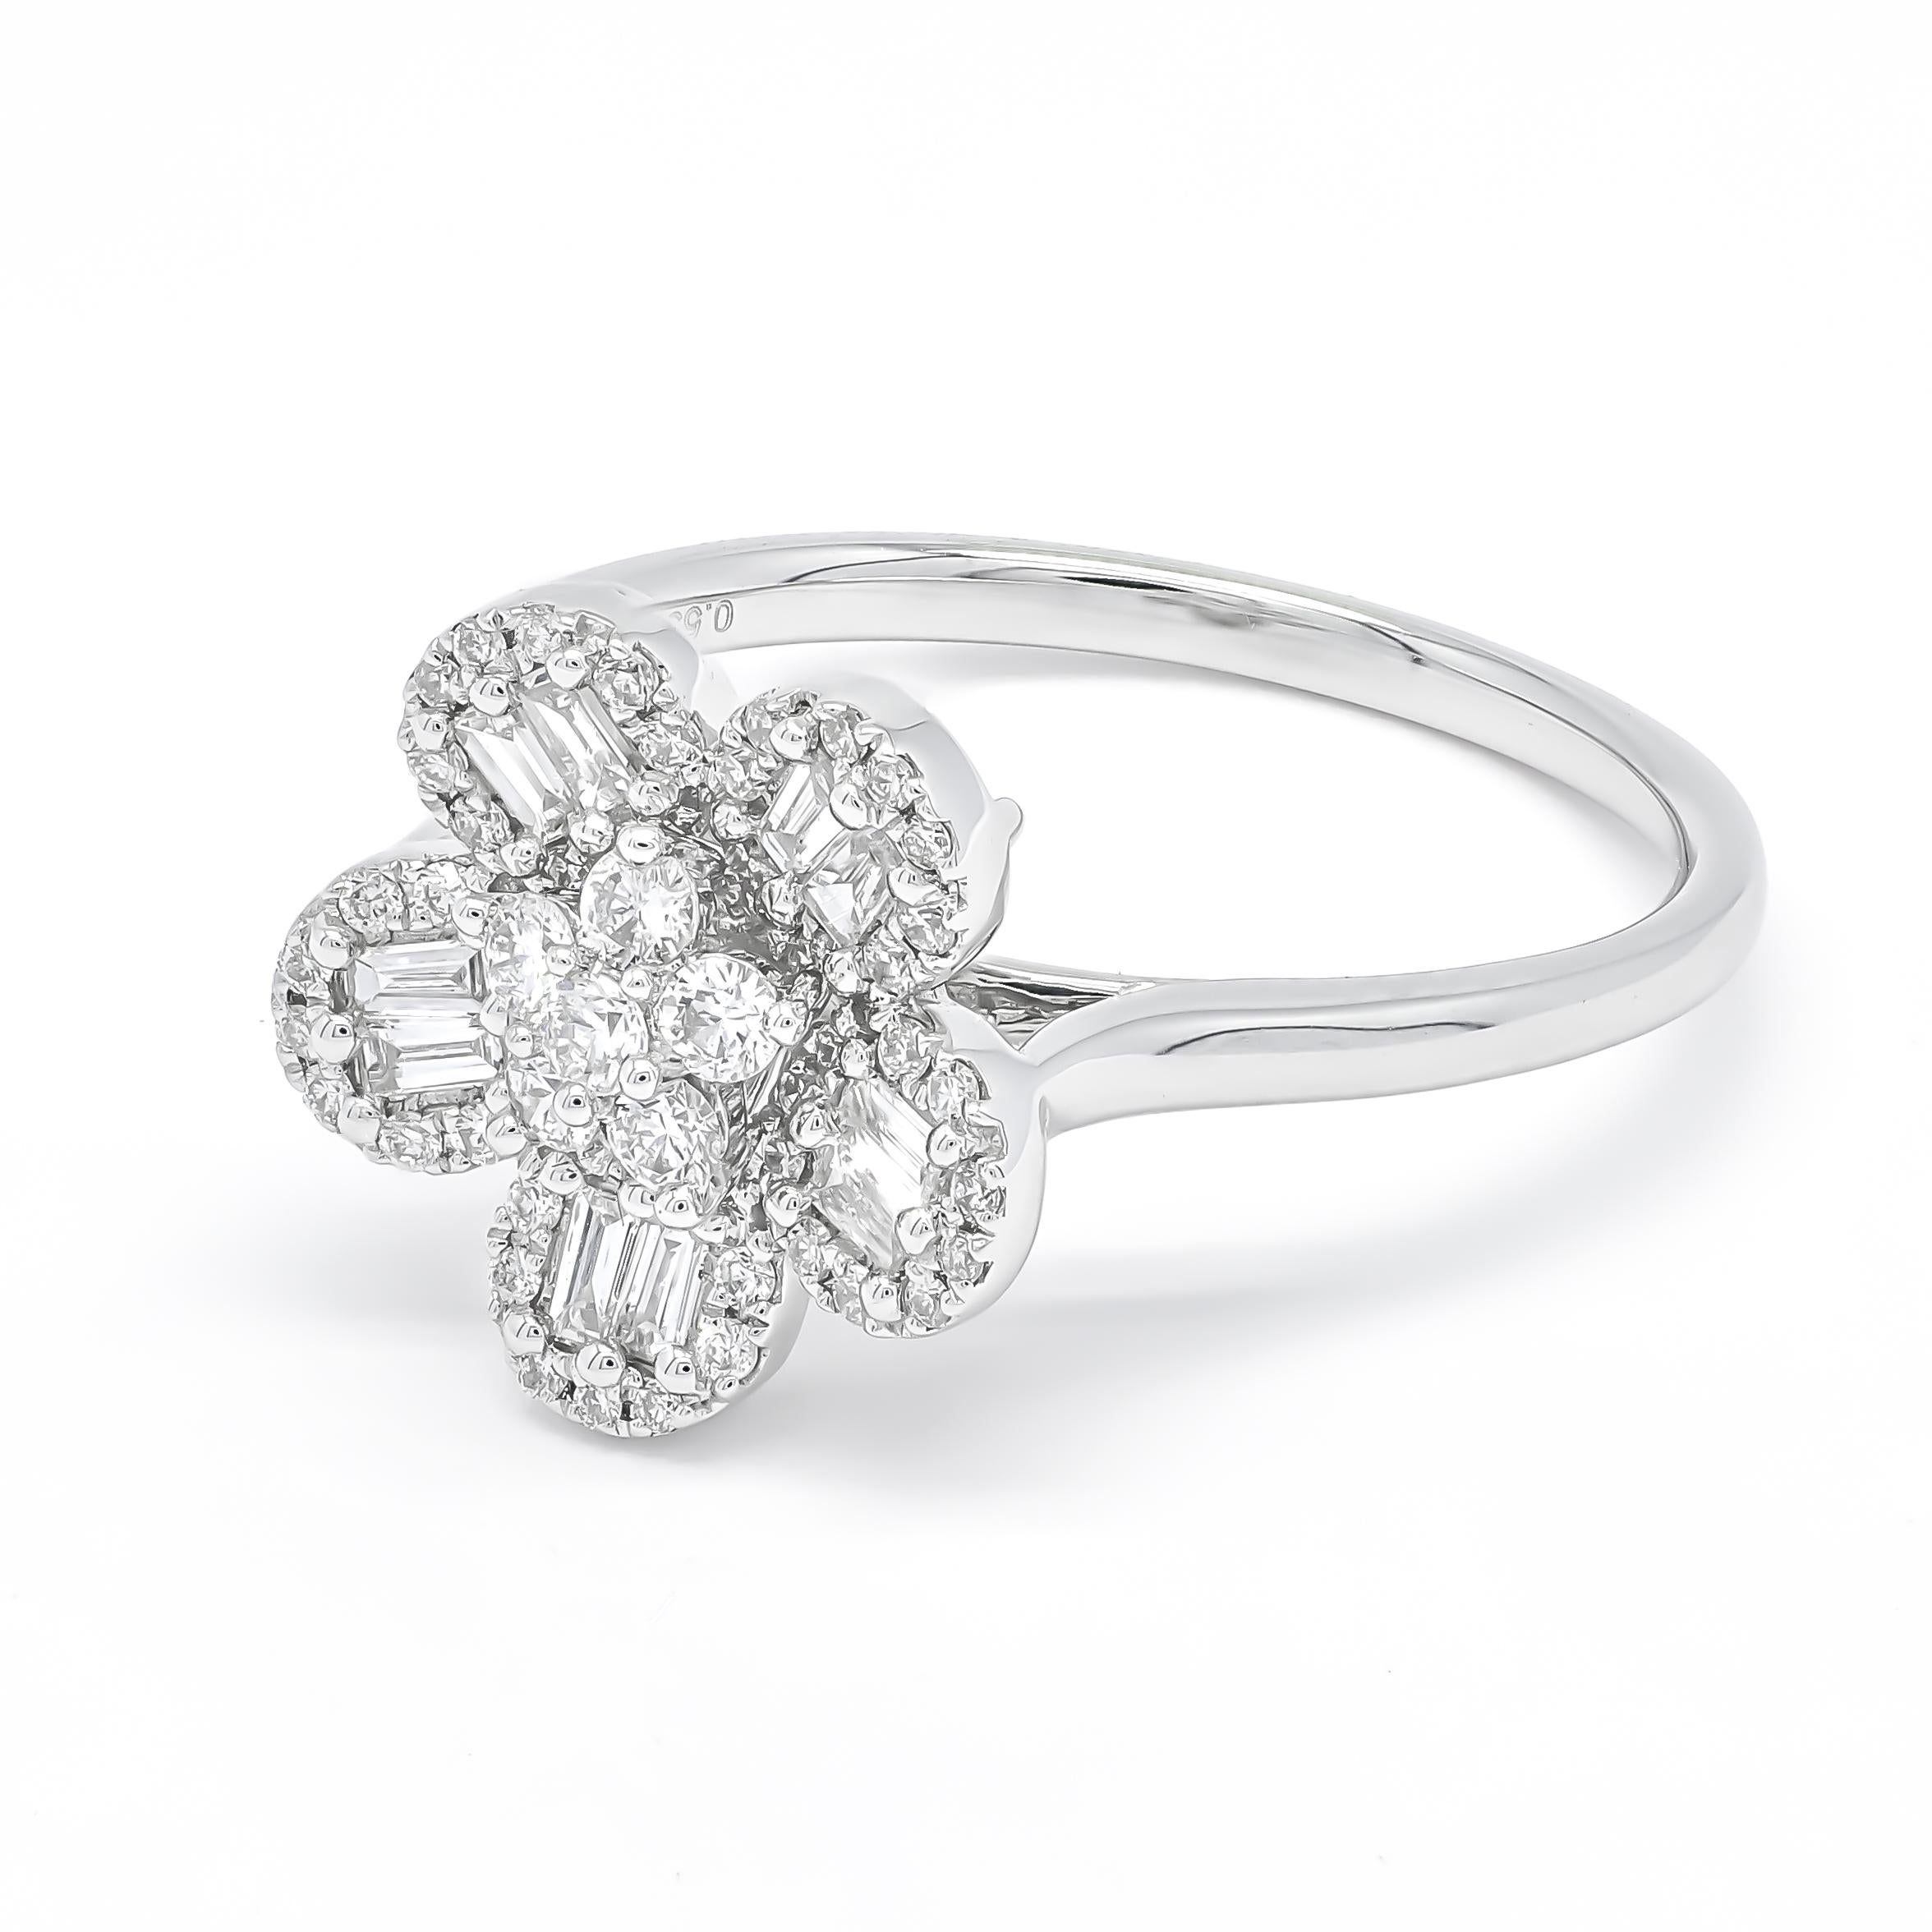 For Sale:  Natural Diamond Ring, 18KT White Gold Statement Ring R072471, Flower Cluster Rin 4